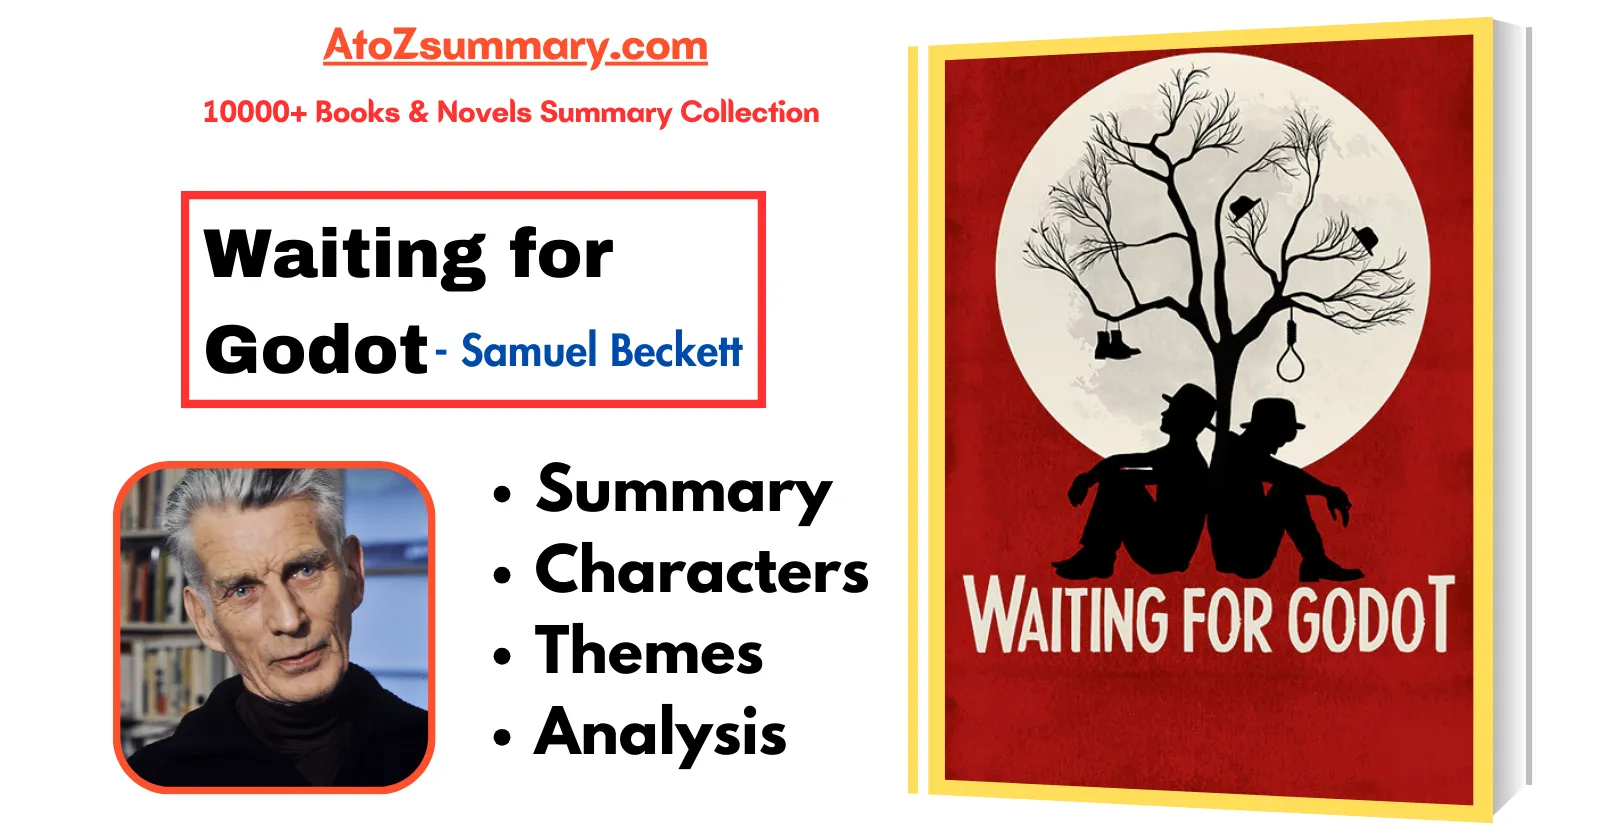 Waiting for Godot Summary, Analysis, Themes & Characters